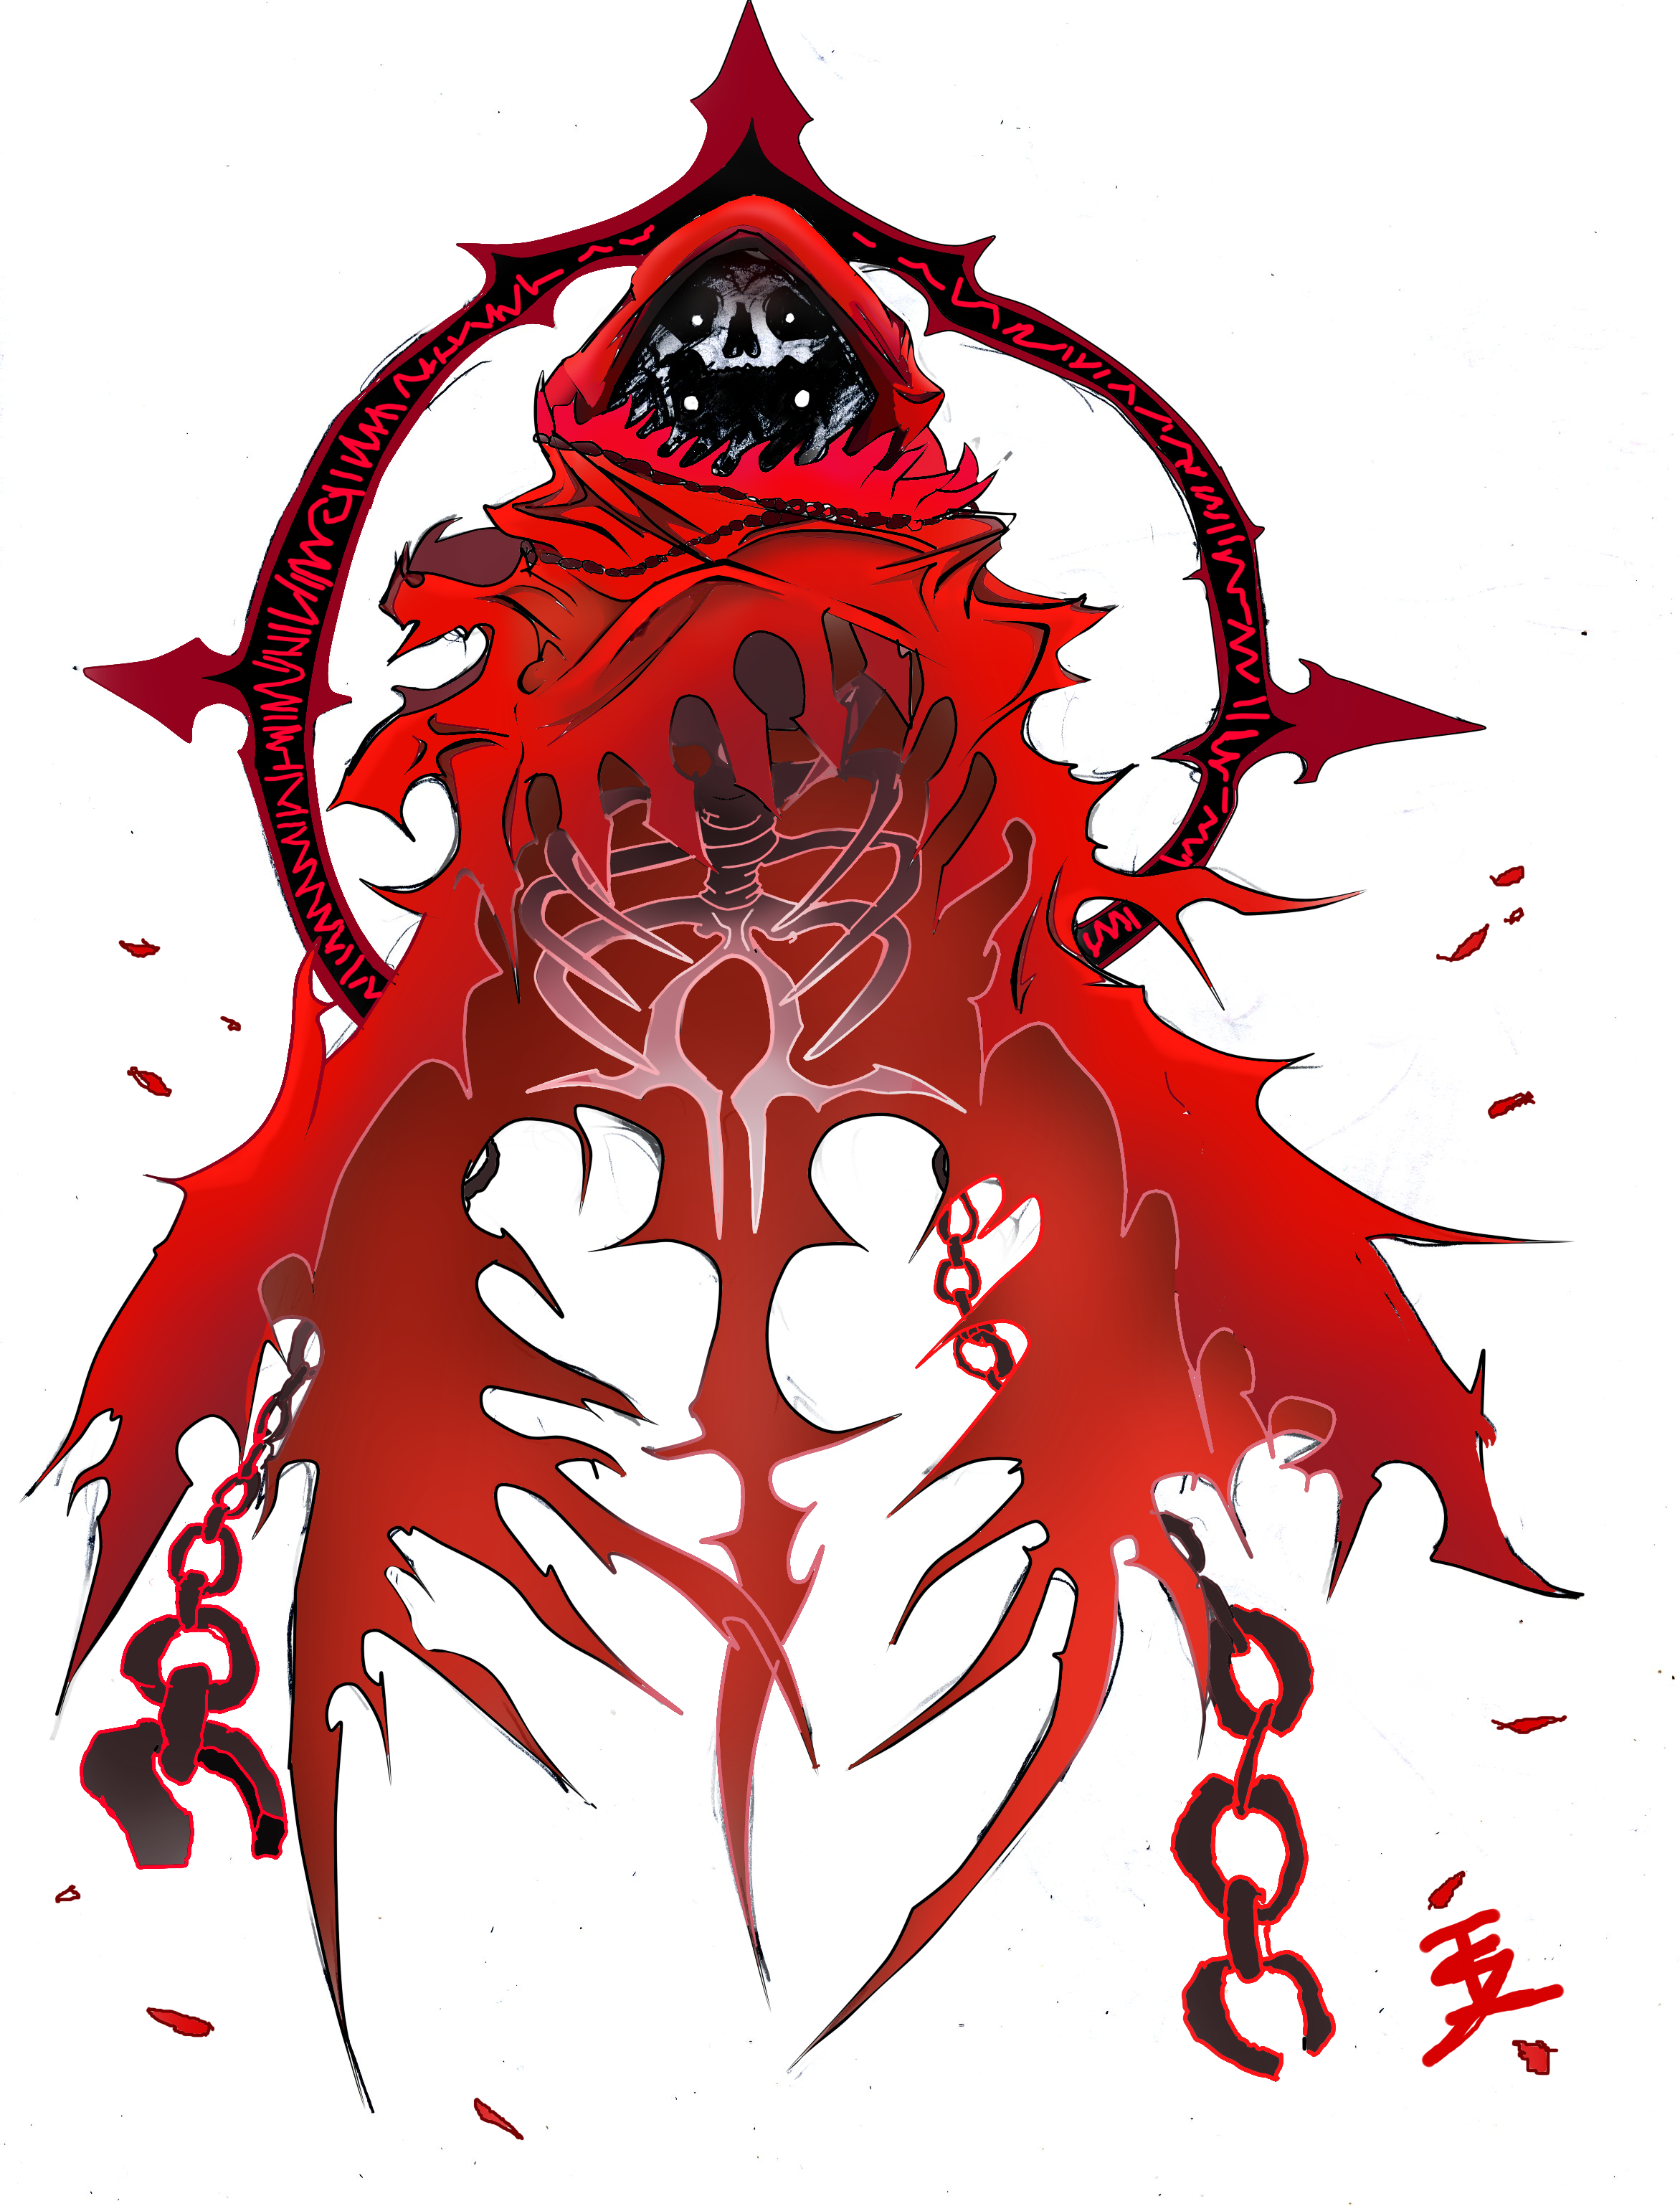 http://fc09.deviantart.net/fs71/f/2011/223/a/8/aka_shiryo___red_ghost___by_teckito-d468tri.png